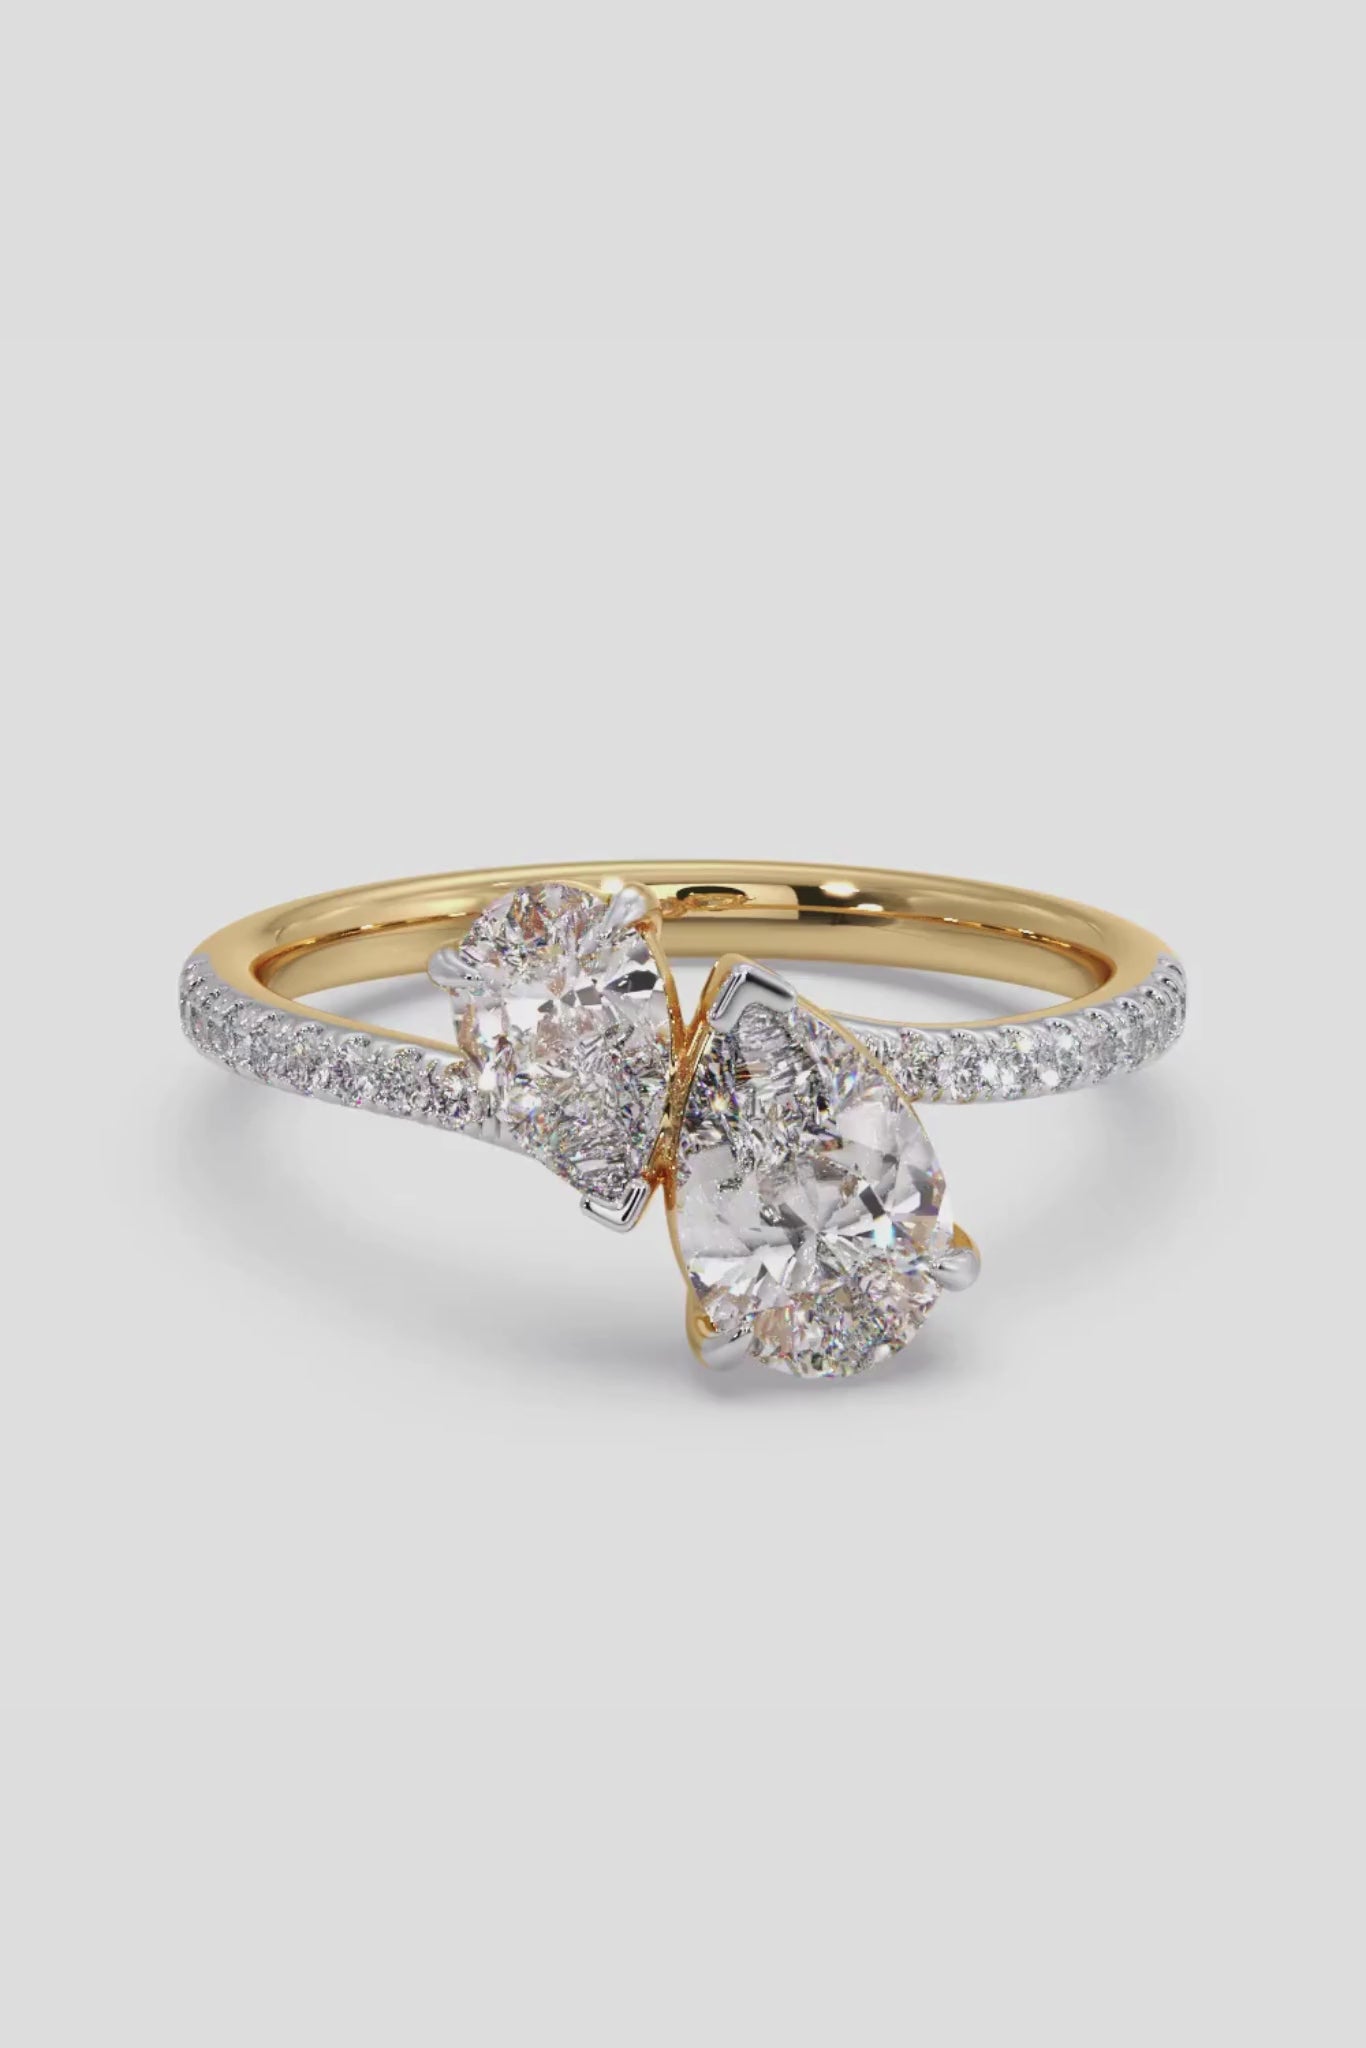 Alternate Pear Solitaire Ring